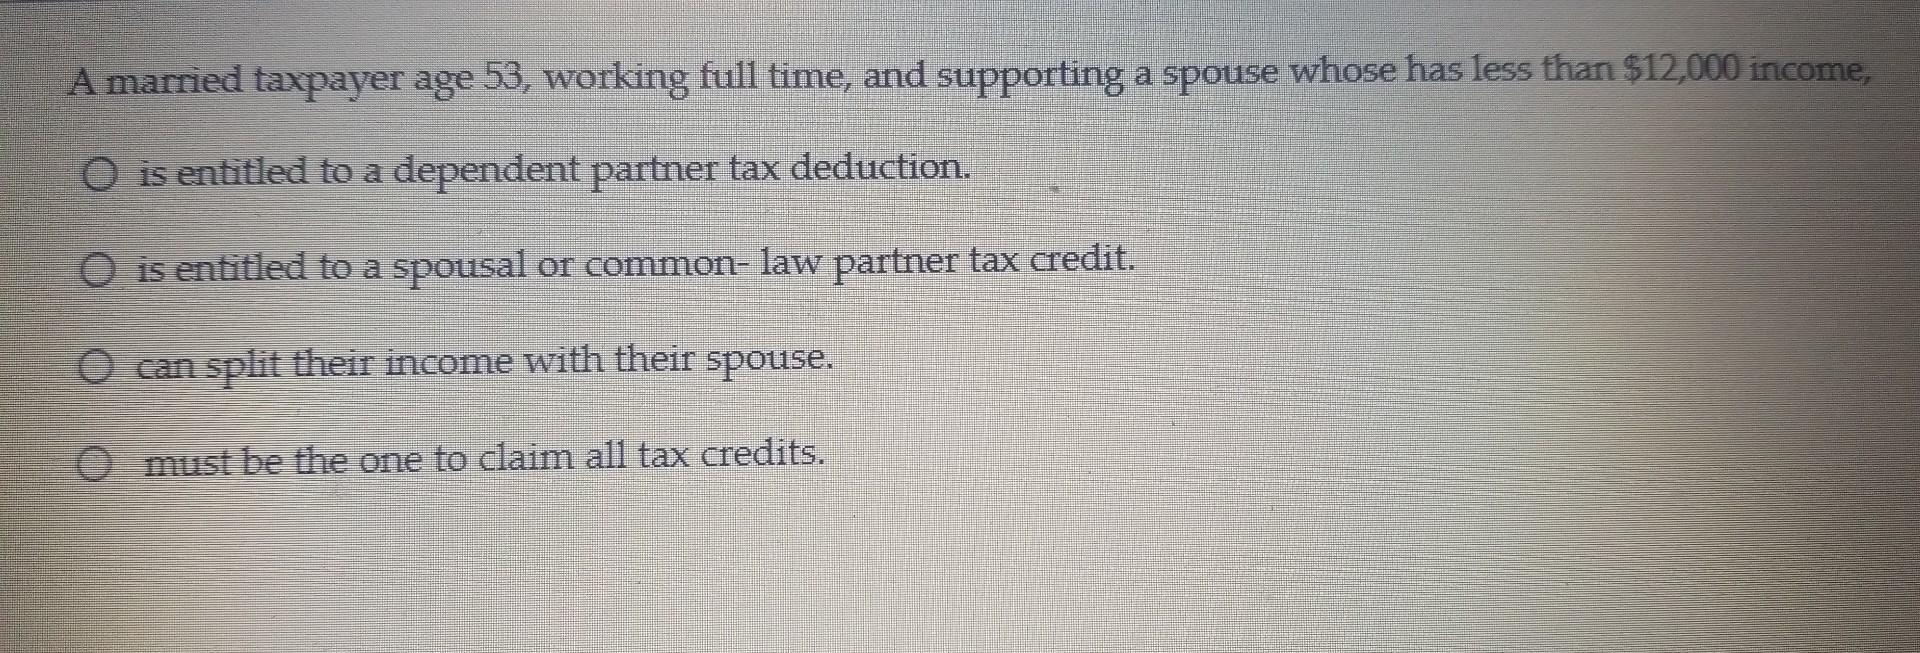 A married taxpayer age 53, working full time, and supporting a spouse whose has less than $12,000 income, is